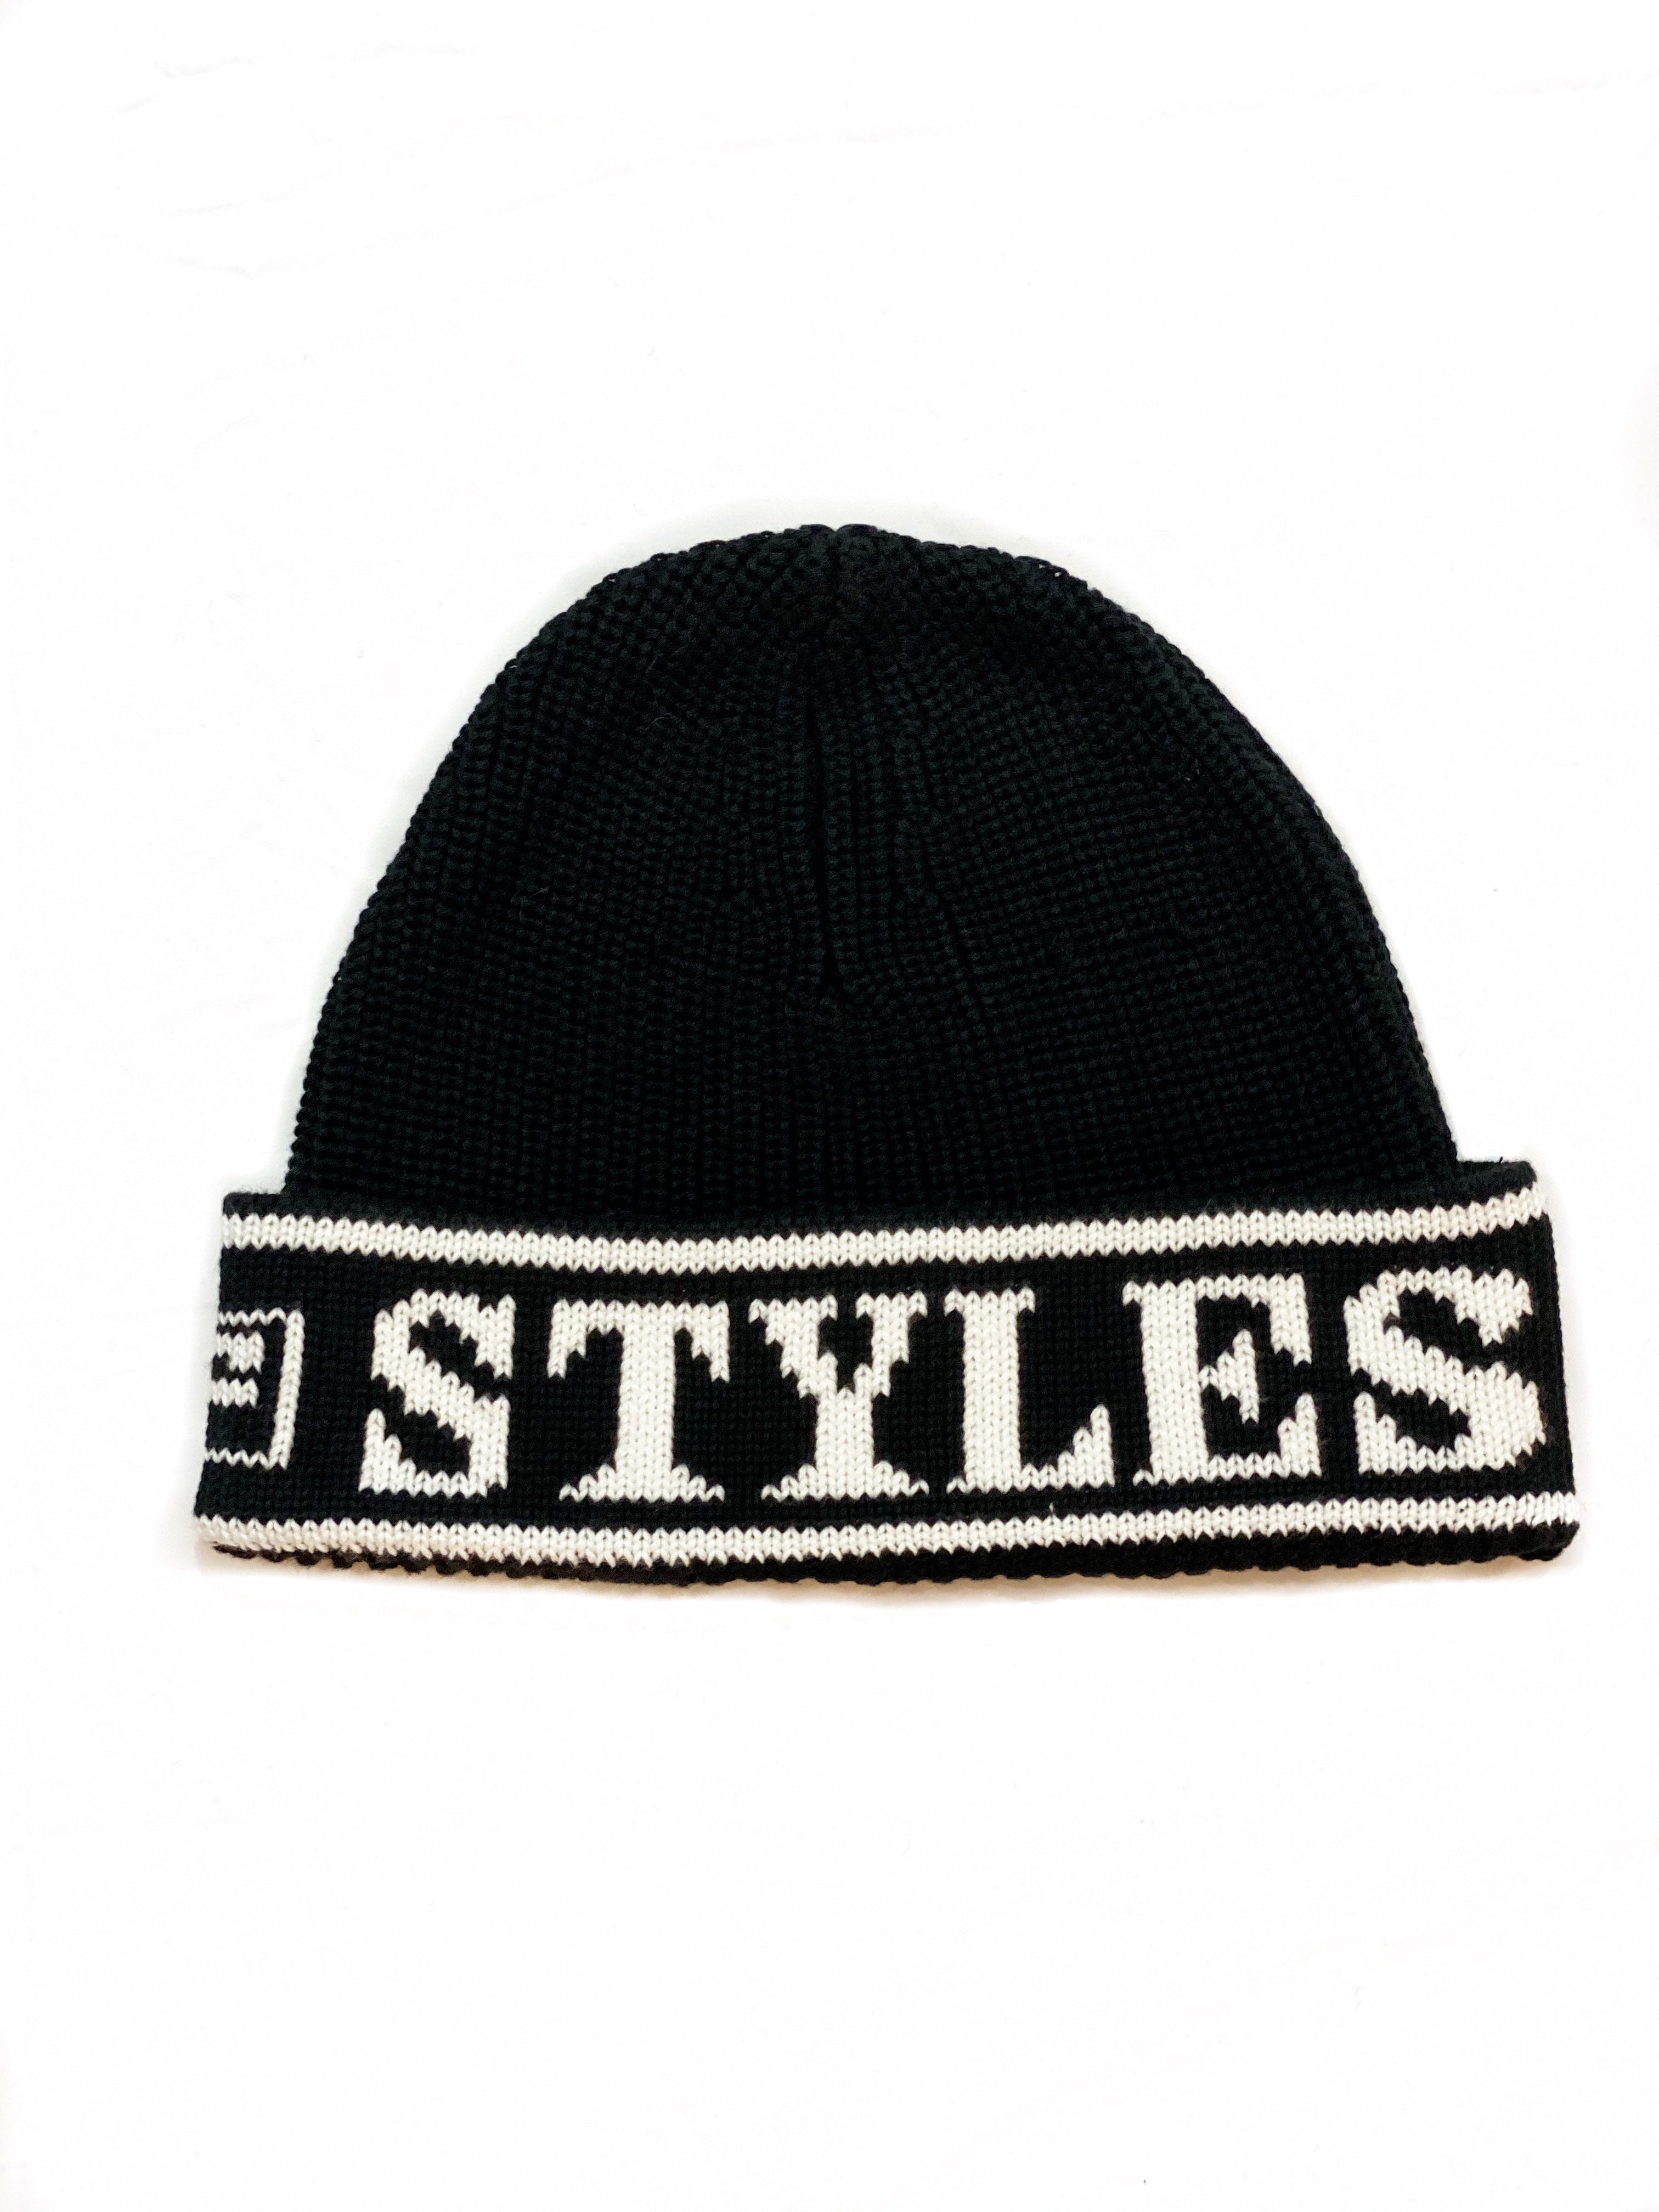 HOUSE OF STYLE SKULLY